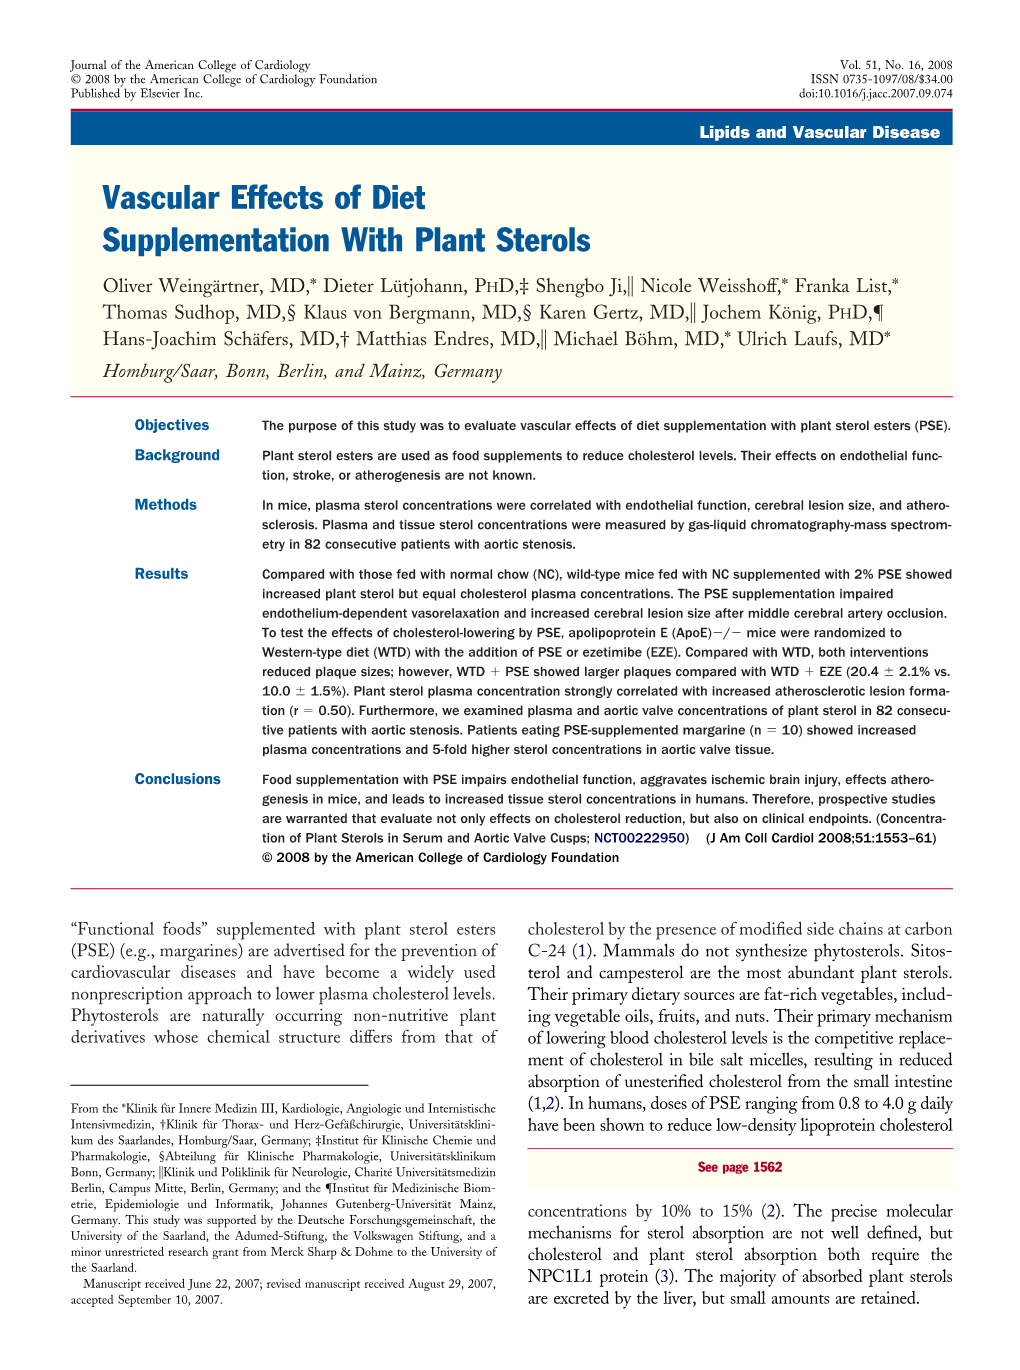 Vascular Effects of Diet Supplementation with Plant Sterols